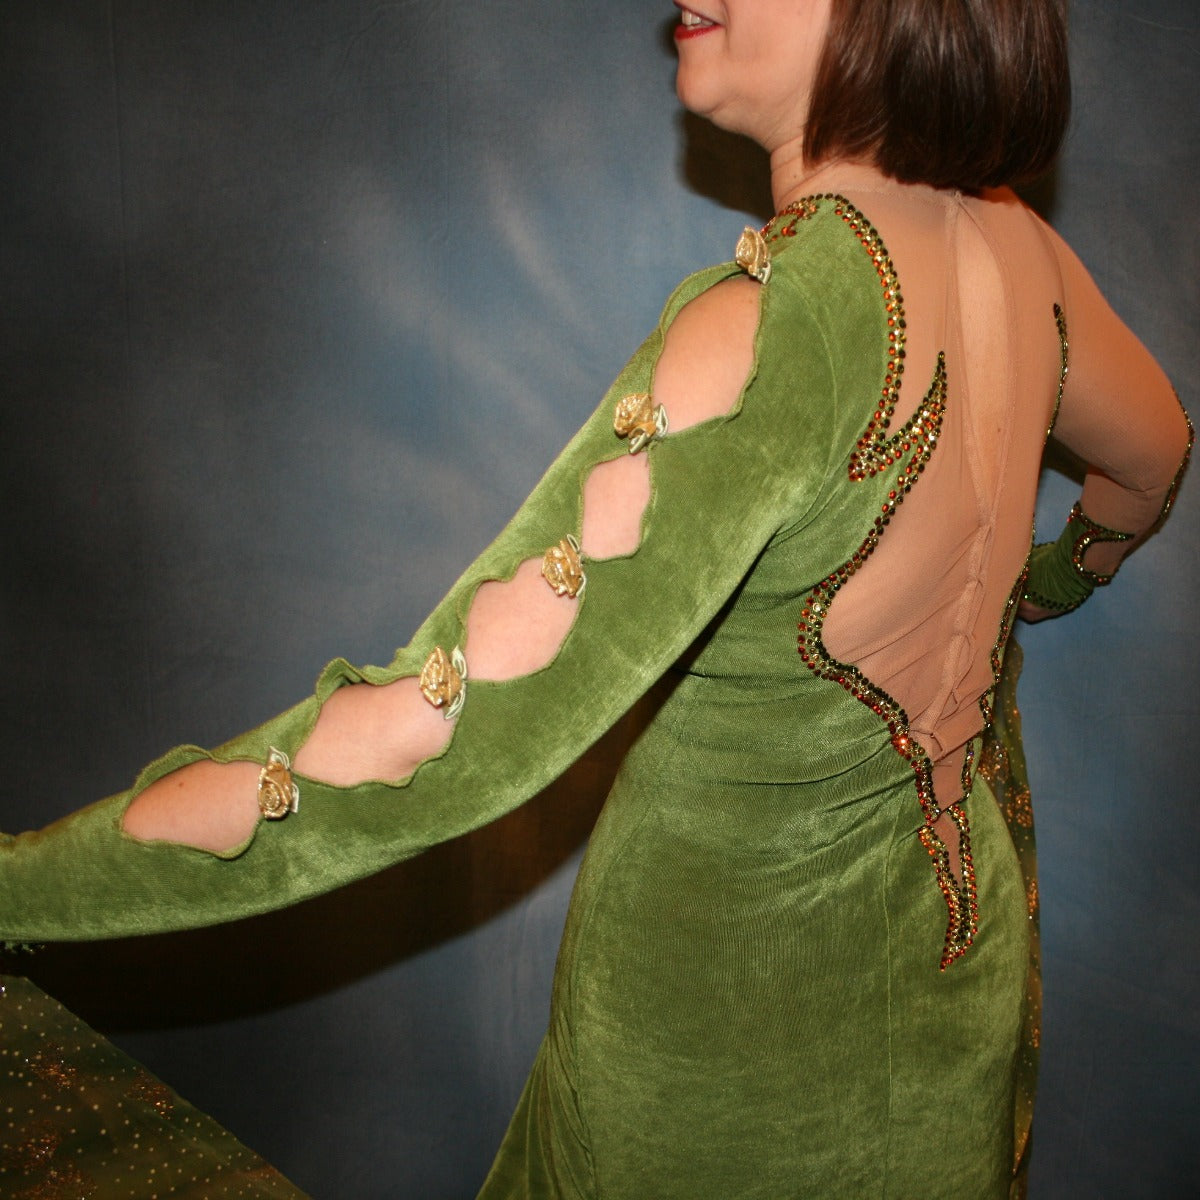 Crystal's Creations side close up view of Green ballroom dress created of luxurious olive green solid slinky on nude illusion base with glitter chiffon print flounces of olive greens & gold… embellished with olivine, jonquil & peach Swarovski rhinestones.